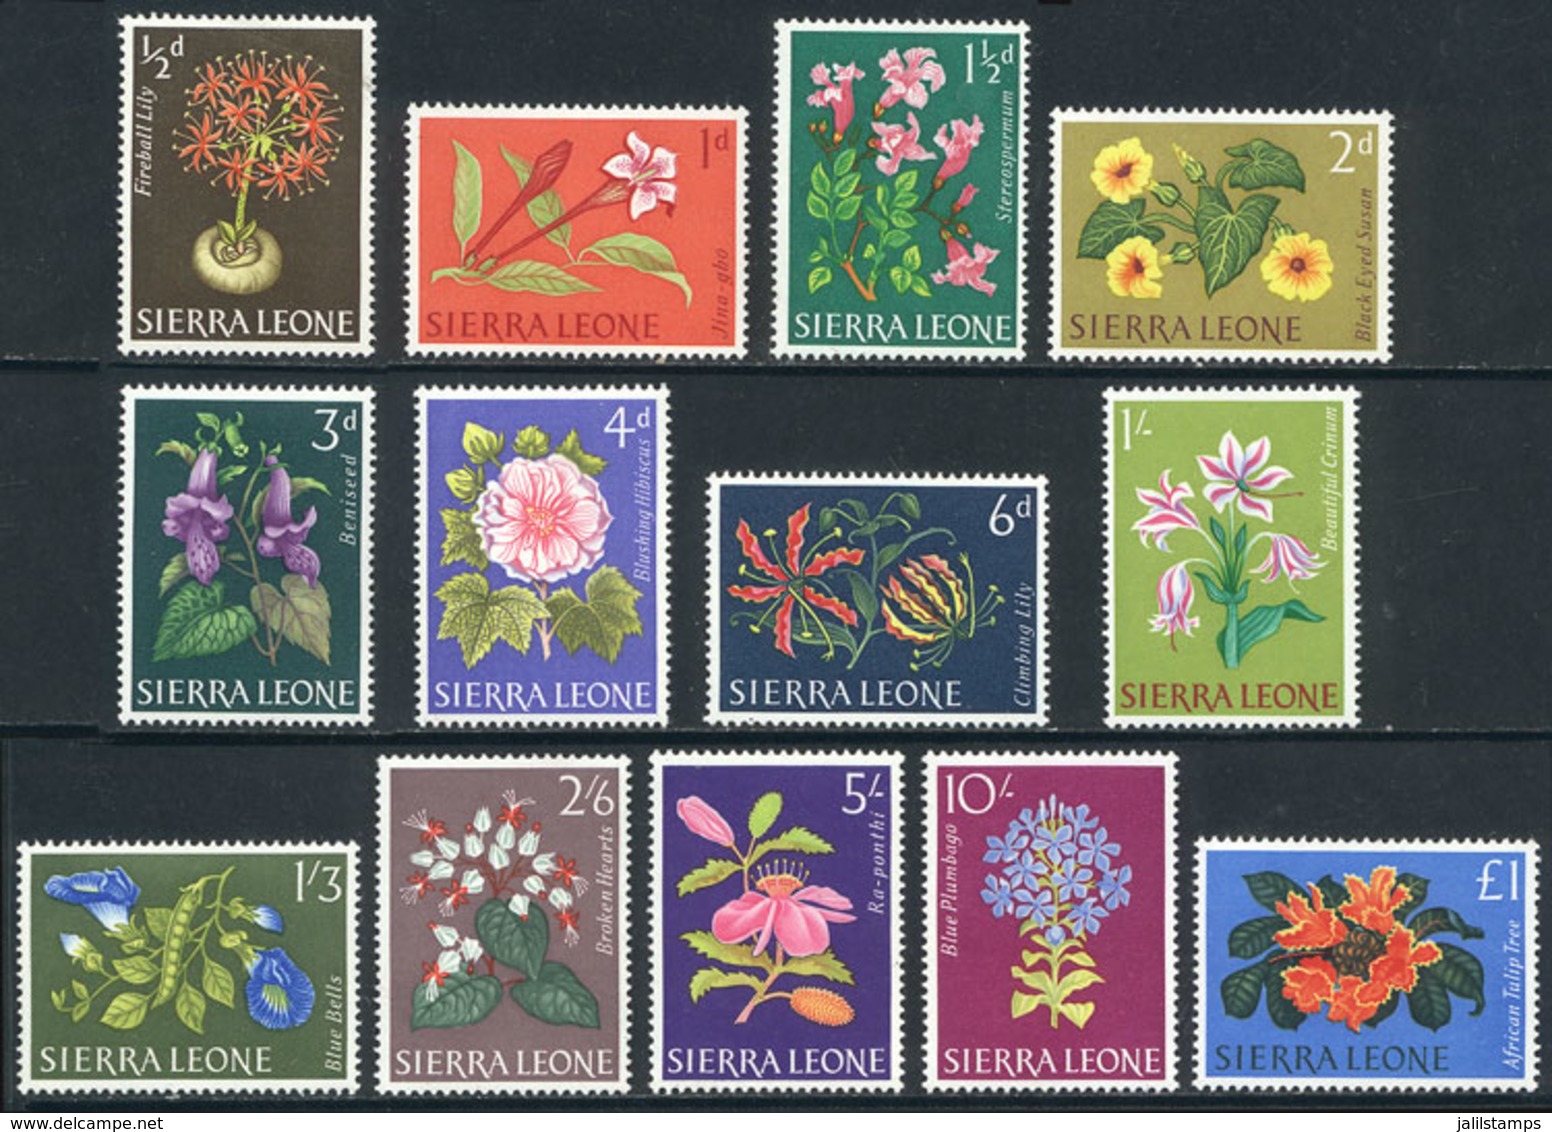 SIERRA LEONE: Sc.227/239, 1963 Flowers, Complete Set Of 13 Unmounted Values, Excellent Quality. - Sierra Leone (...-1960)